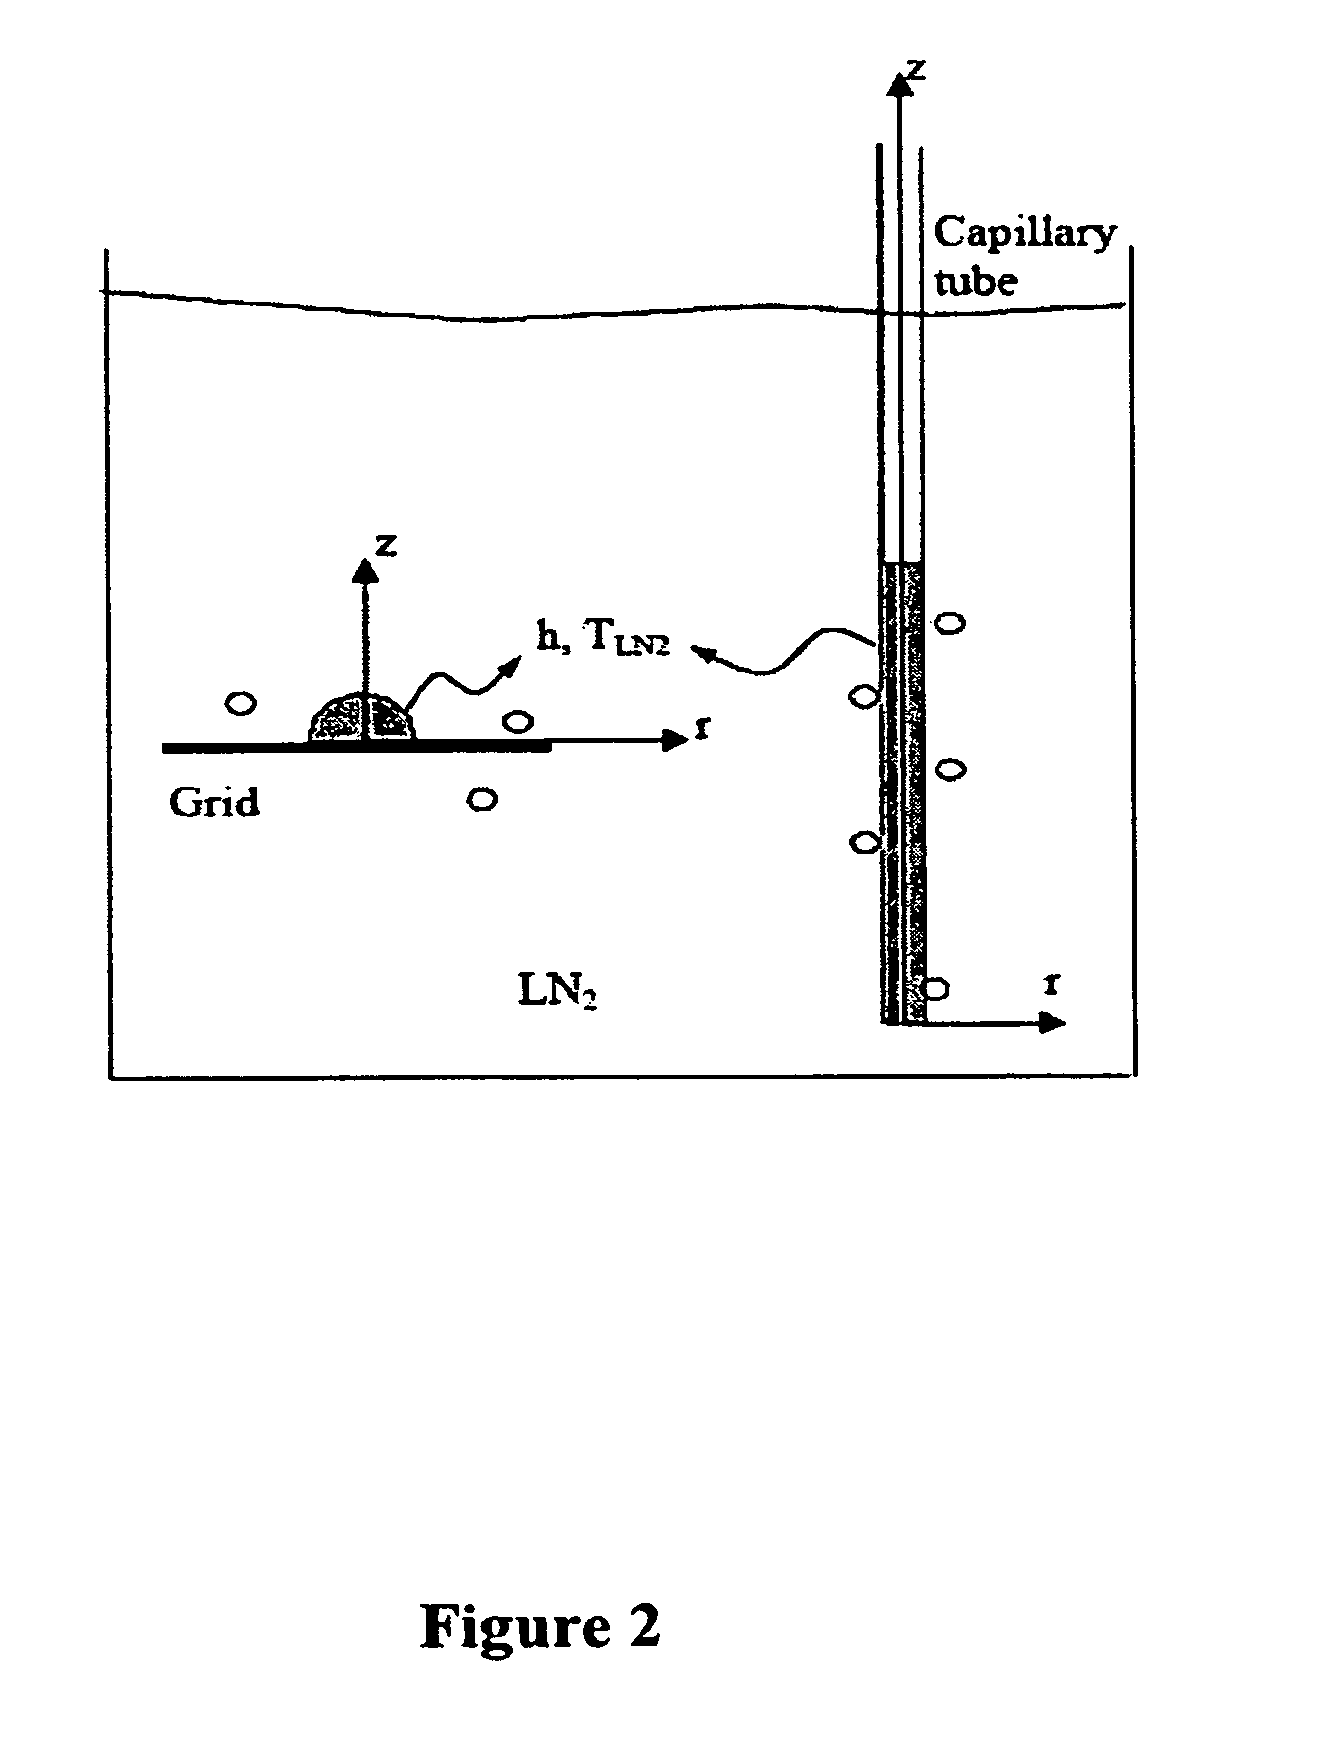 Methods for the cryopreservation of cells